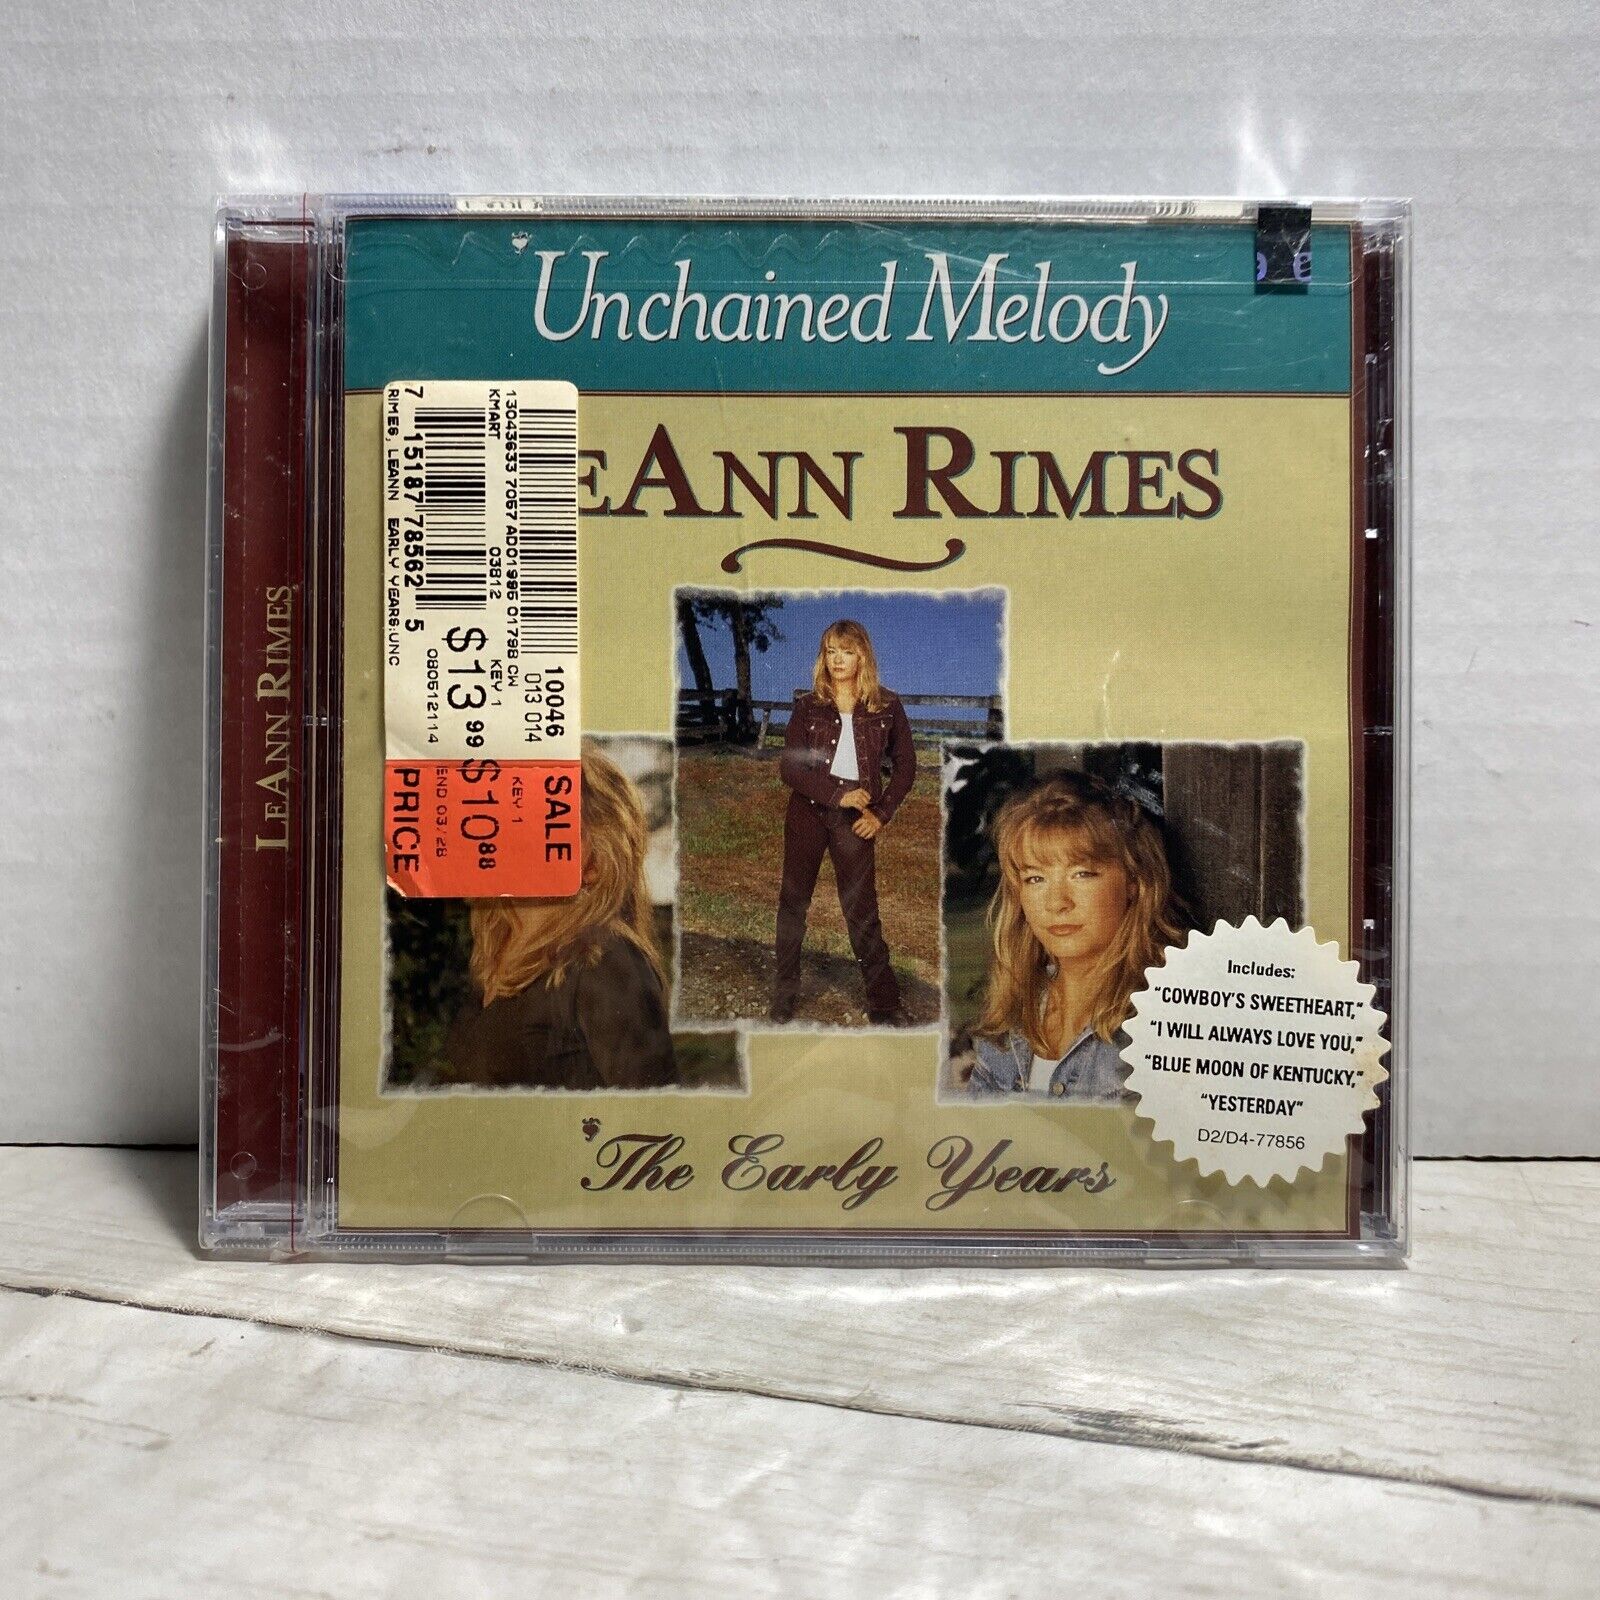 Leann Rimes - Unchained Melody: The Early Years CD New Factory Sealed